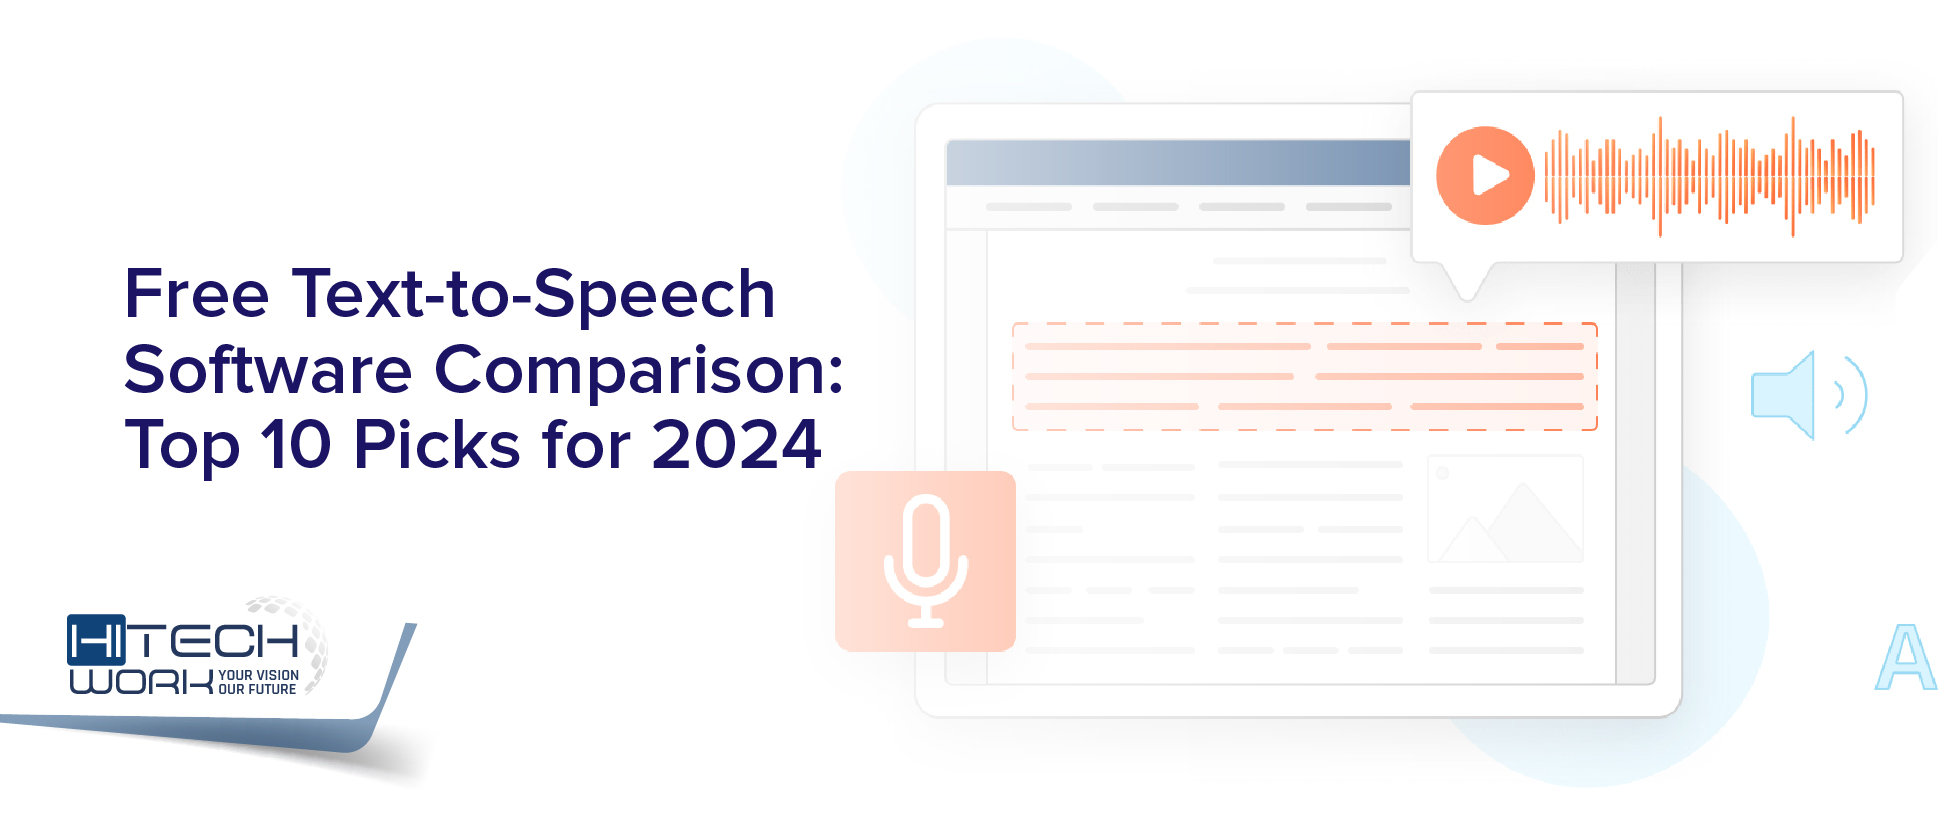 Free Text-to-Speech Software Comparison